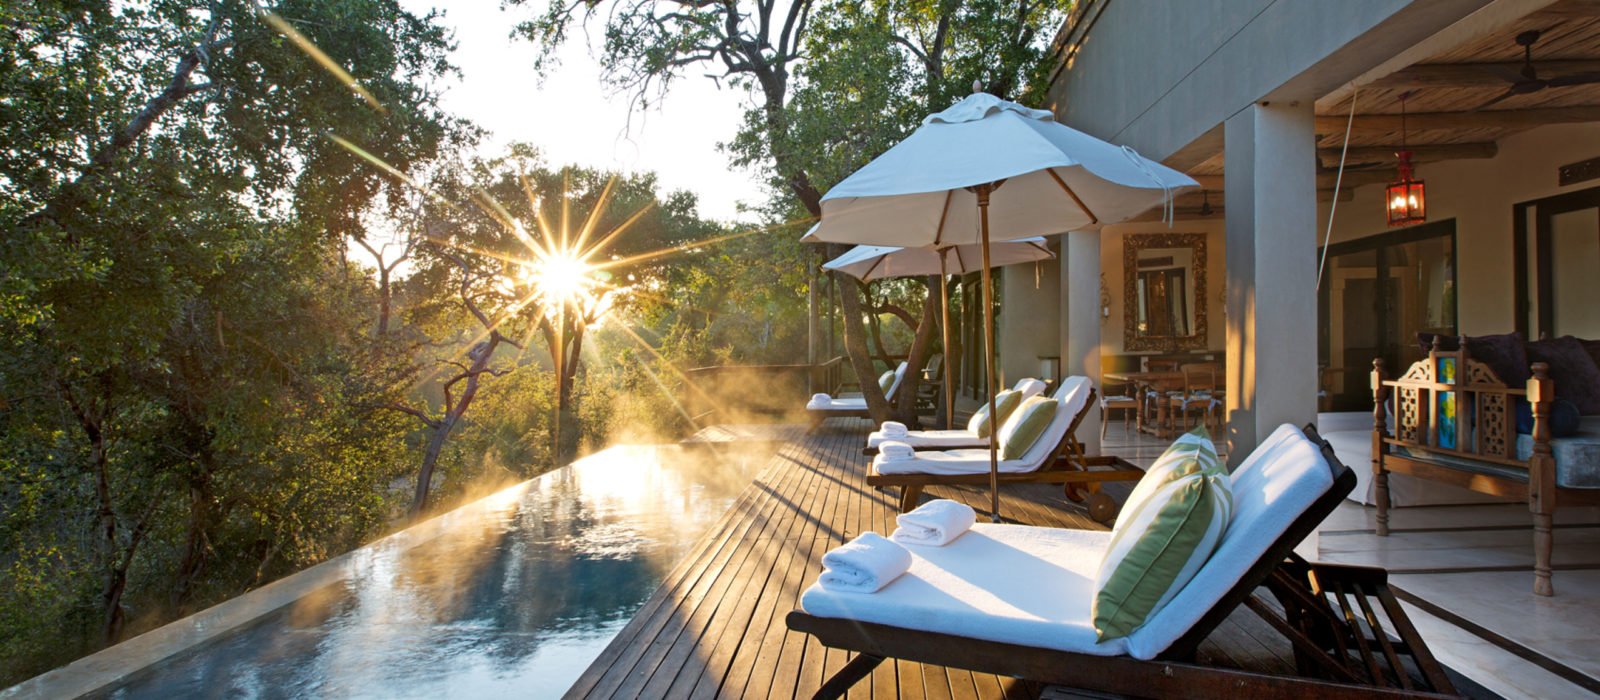 Sunset at the Royal Malewane, South Africa.